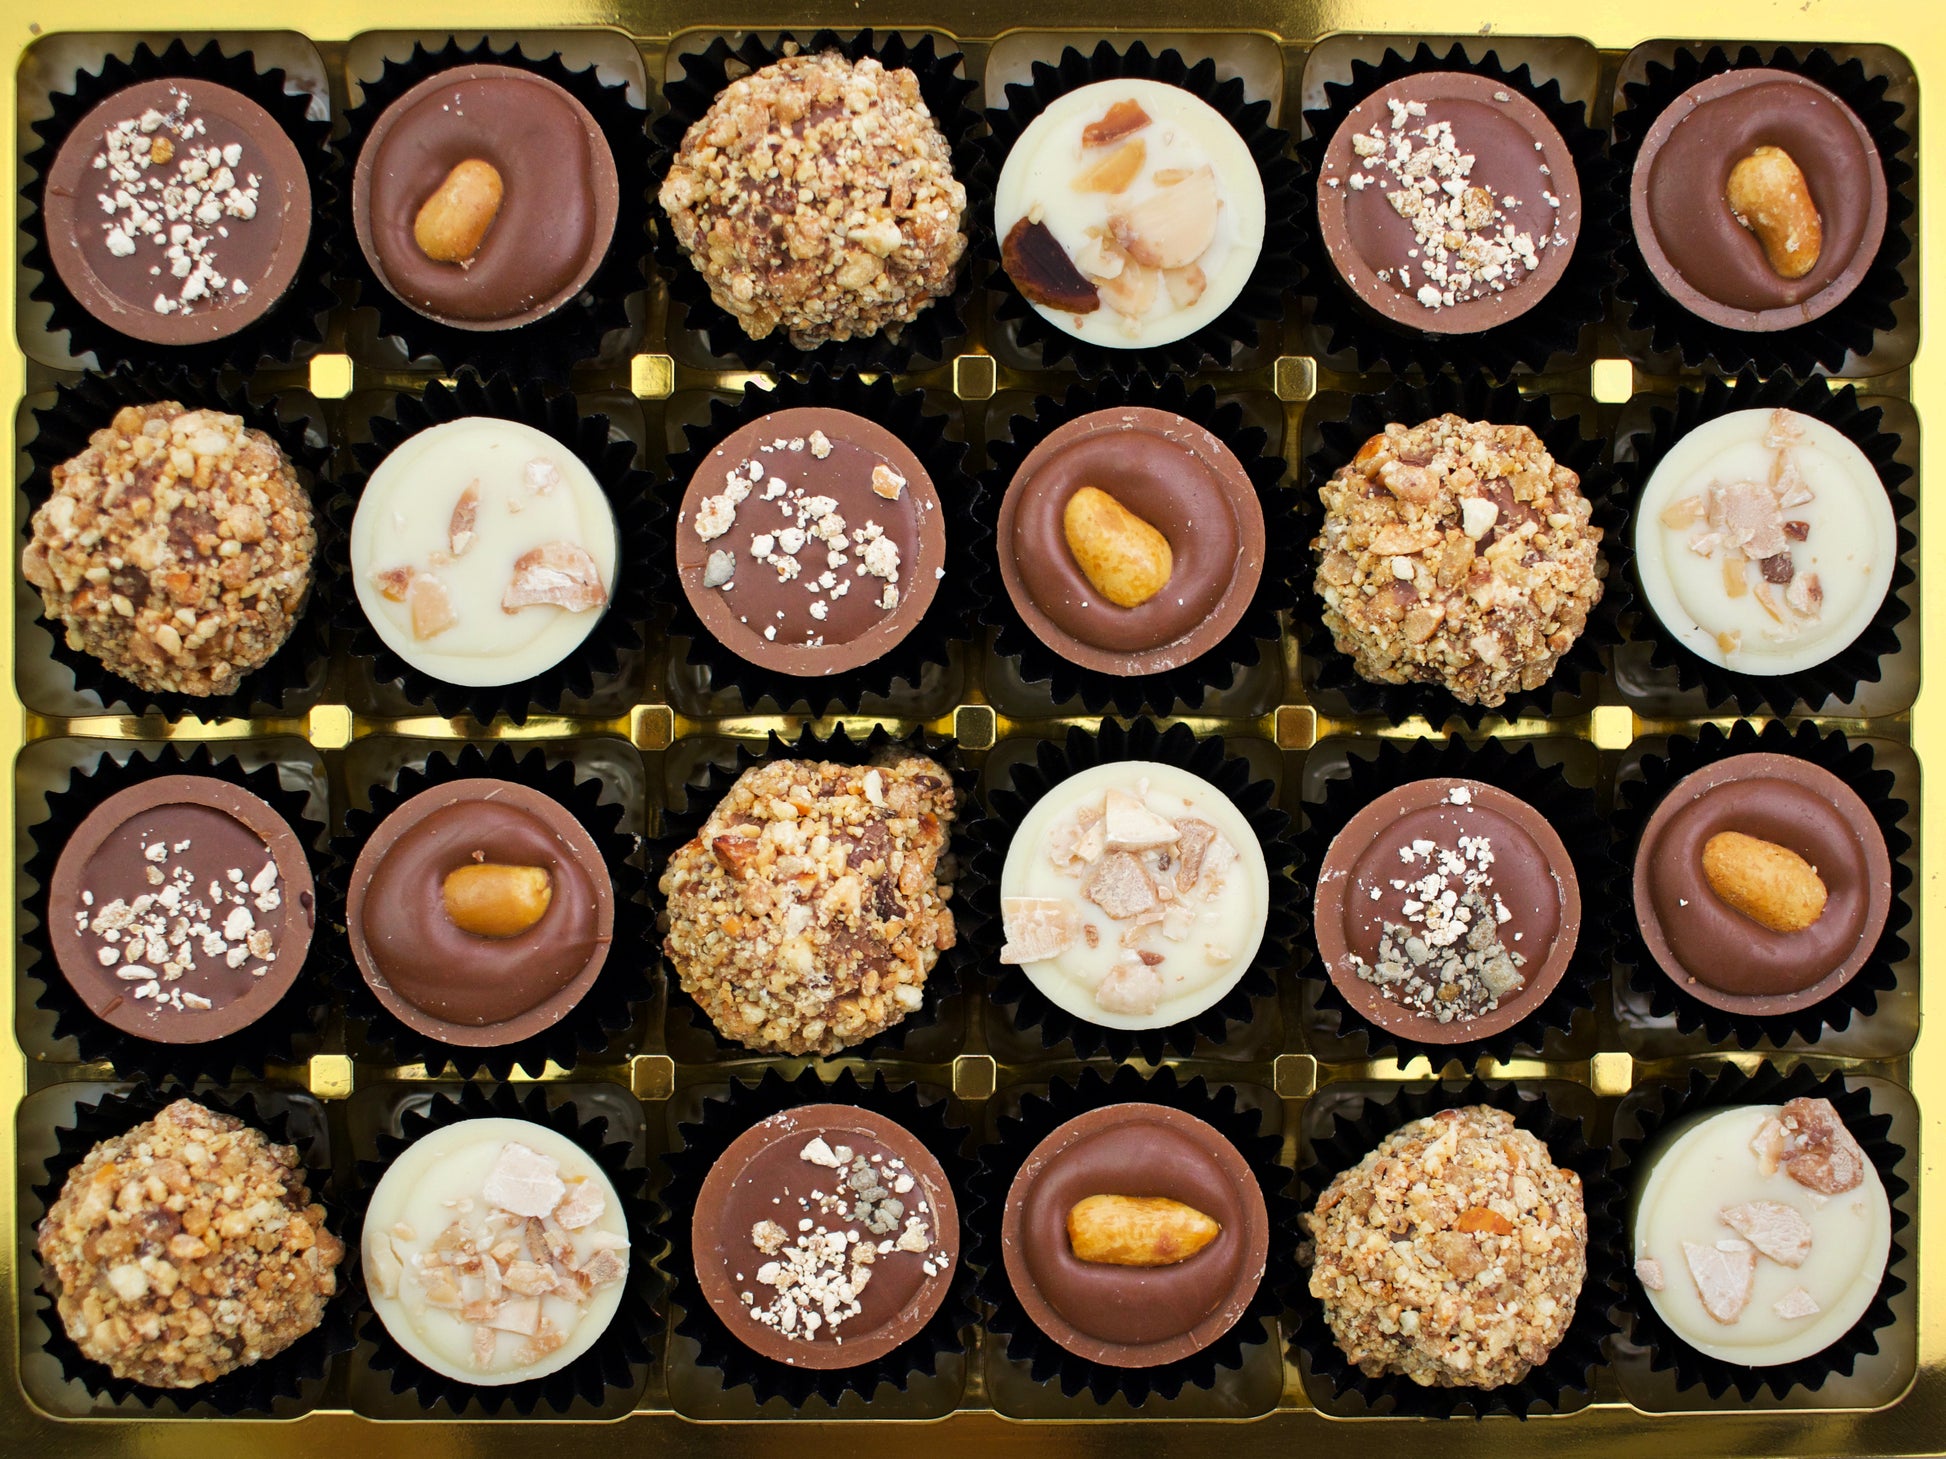 image shows a gift selection of 24 nut butter and caramel filled chocolates